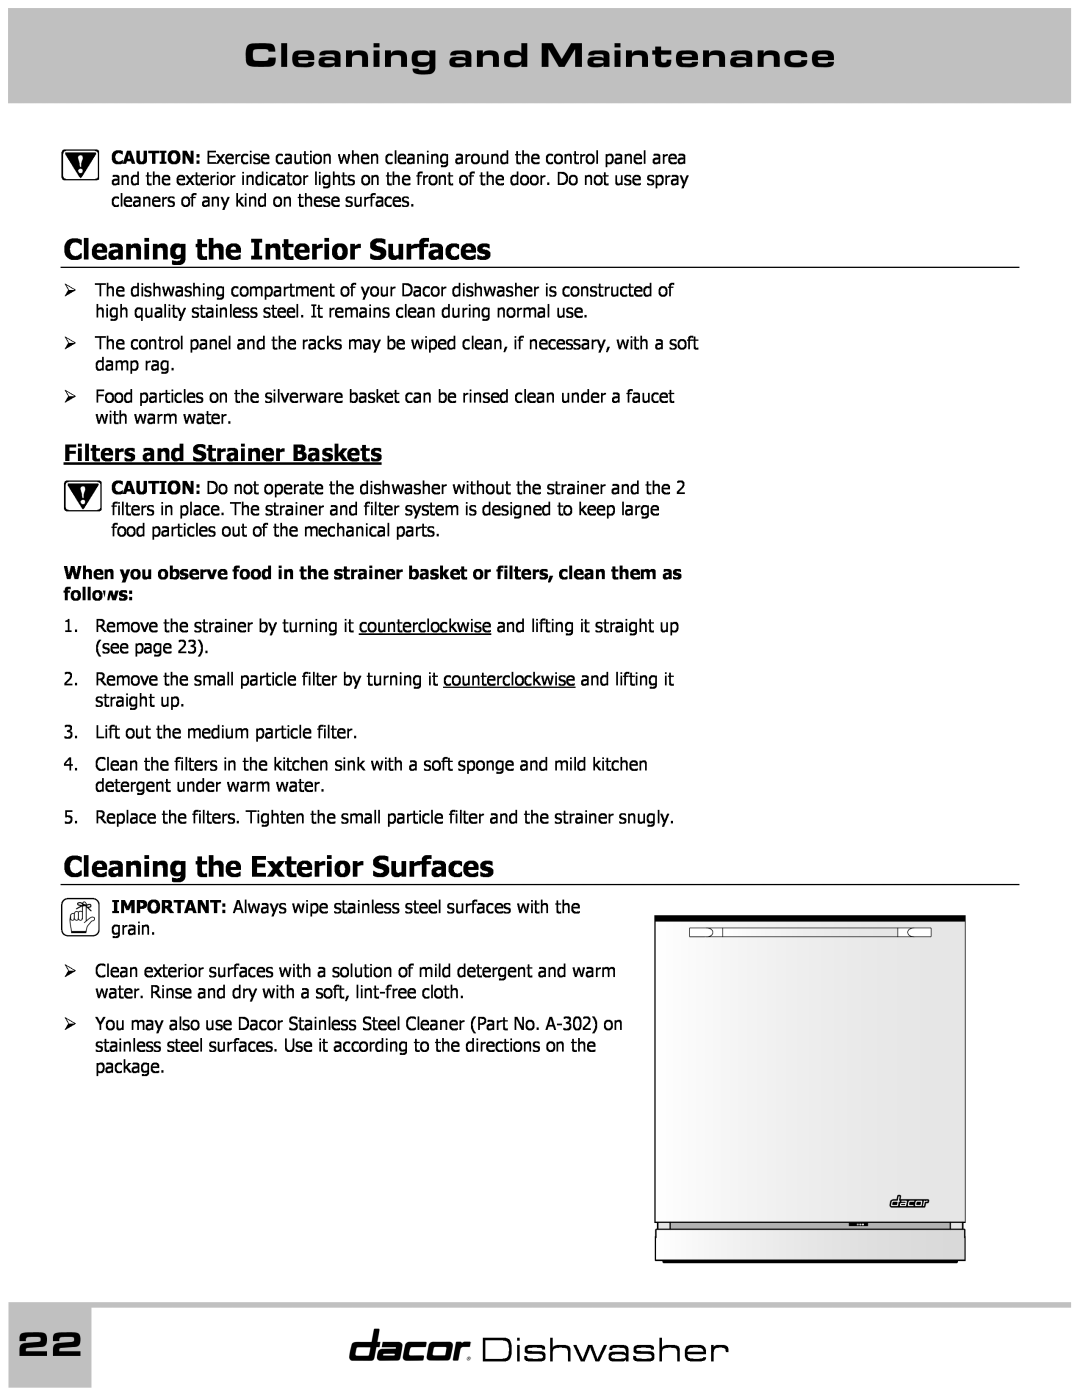 Dacor 65537 manual Cleaning and Maintenance, Cleaning the Interior Surfaces, Cleaning the Exterior Surfaces, Dishwasher 